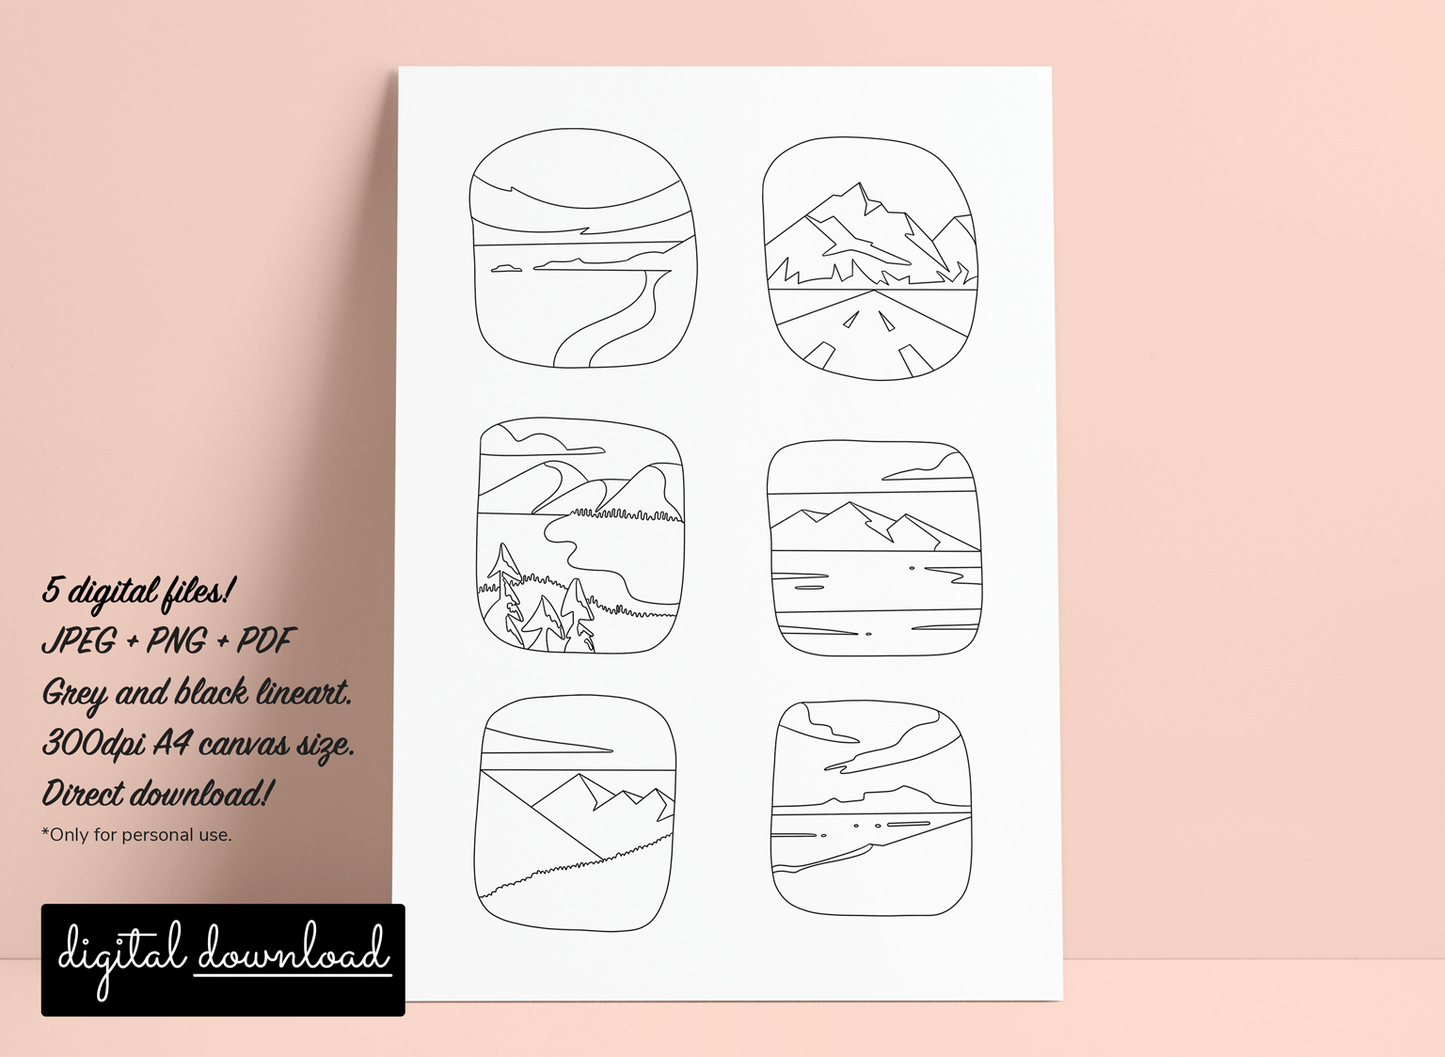 Printable colouring page with landscapes grid design.